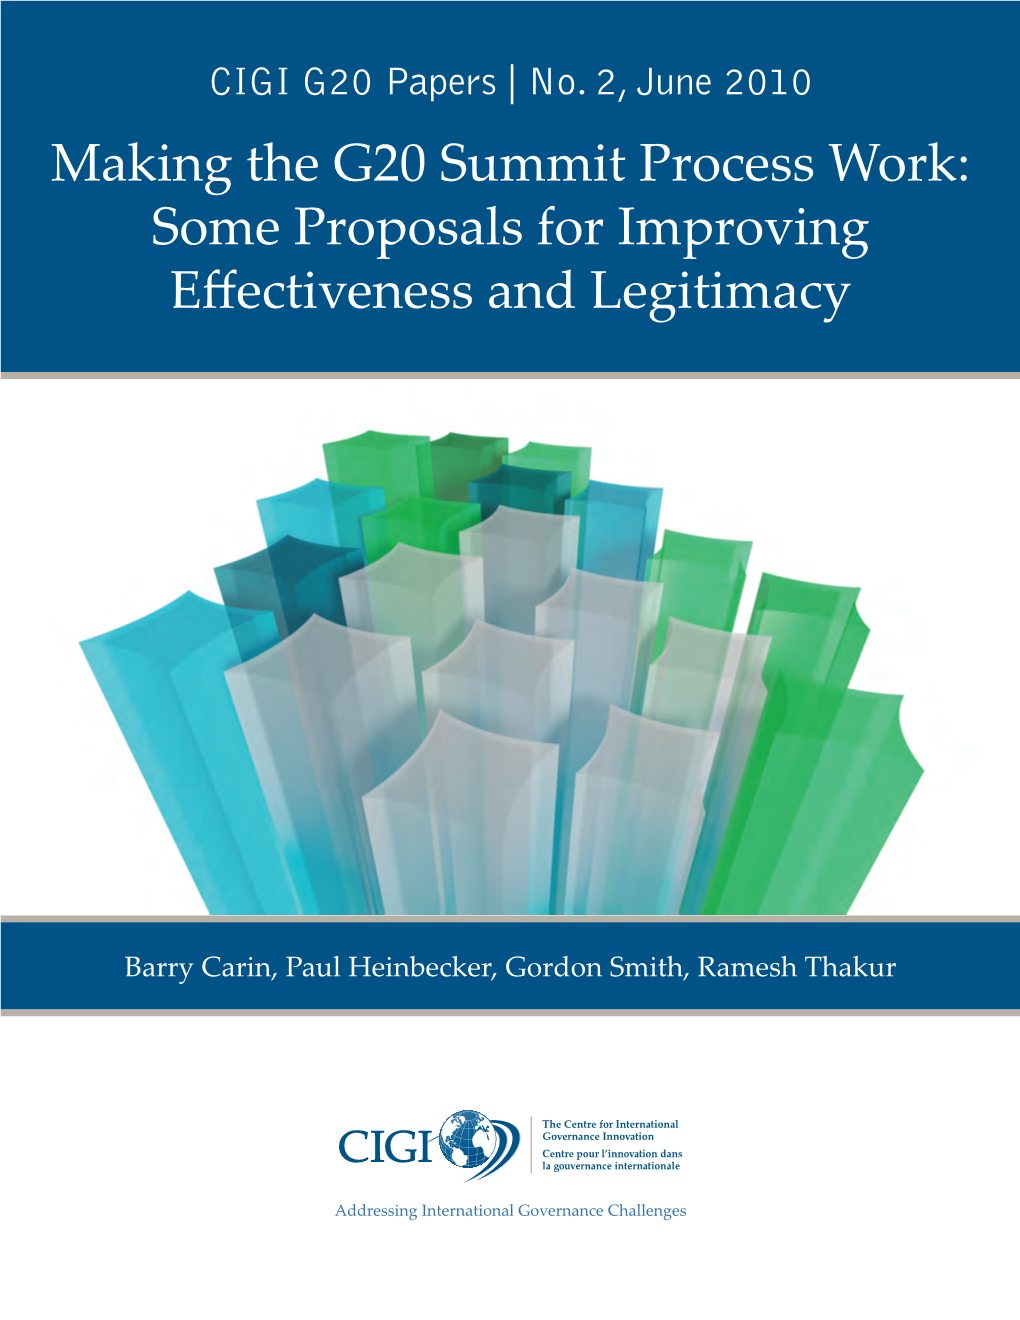 Making the G20 Summit Process Work: Some Proposals for Improving Effectiveness and Legitimacy